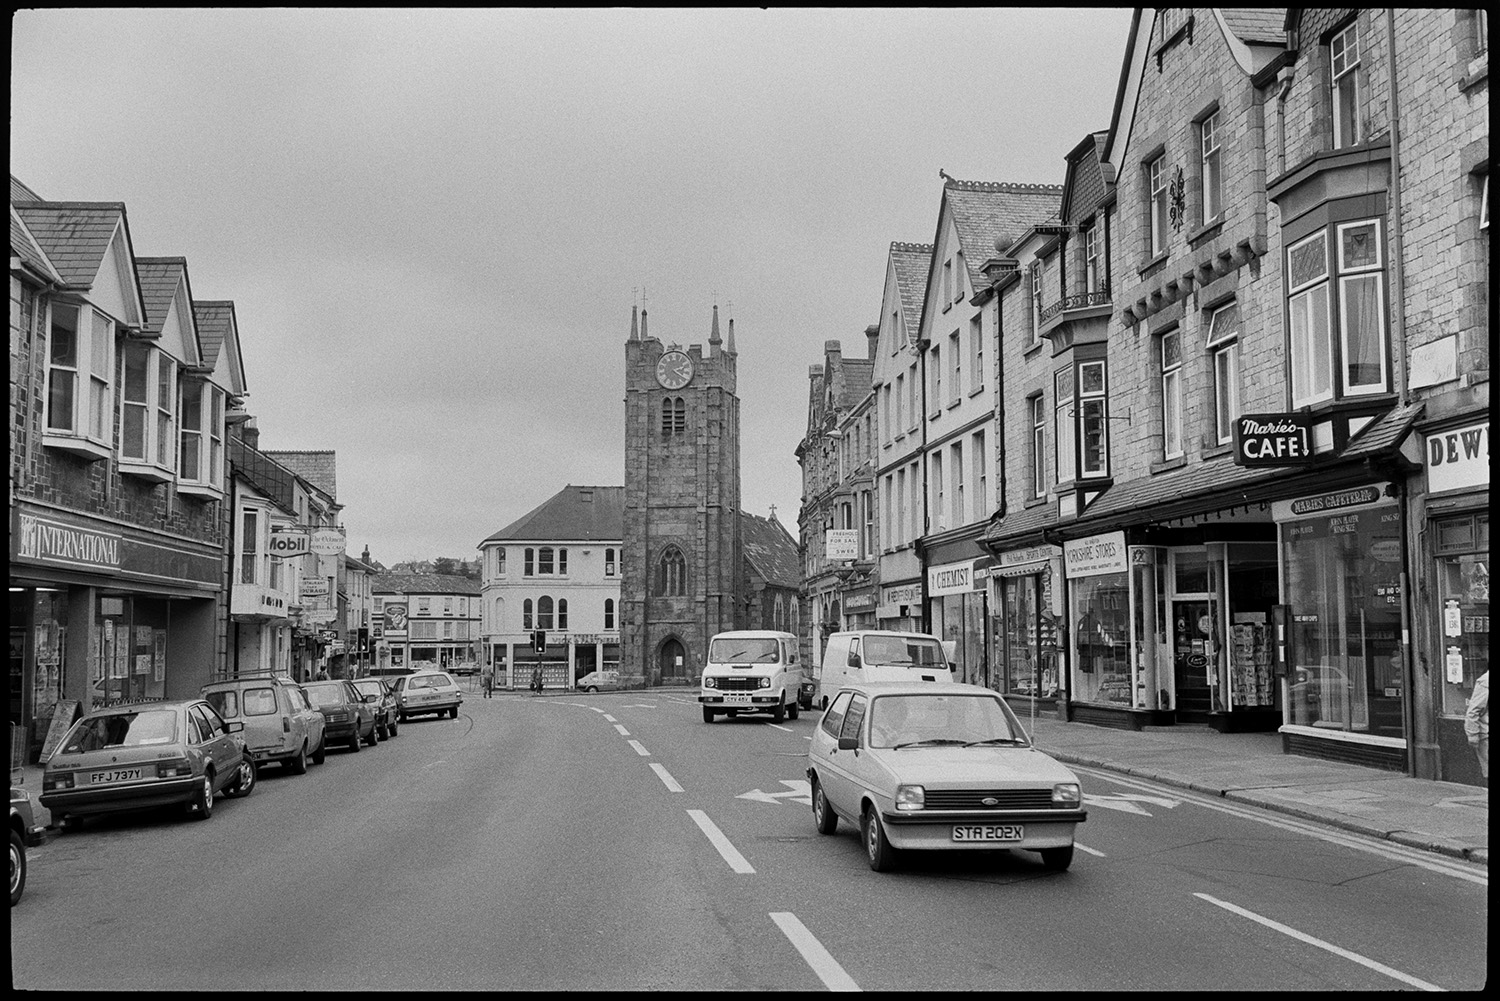 Street scene with cars, traffic church tower. Comparison with old photo.
[A view of Fore Street, Okehampton, showing St James' Church, and cars and vans parked and driving along the road. Shops including International Supermarket, Chemist, Yorkshire Stores, Maries' Cafe, Dewhurst, and Vick and Partners estate agents are visible.]